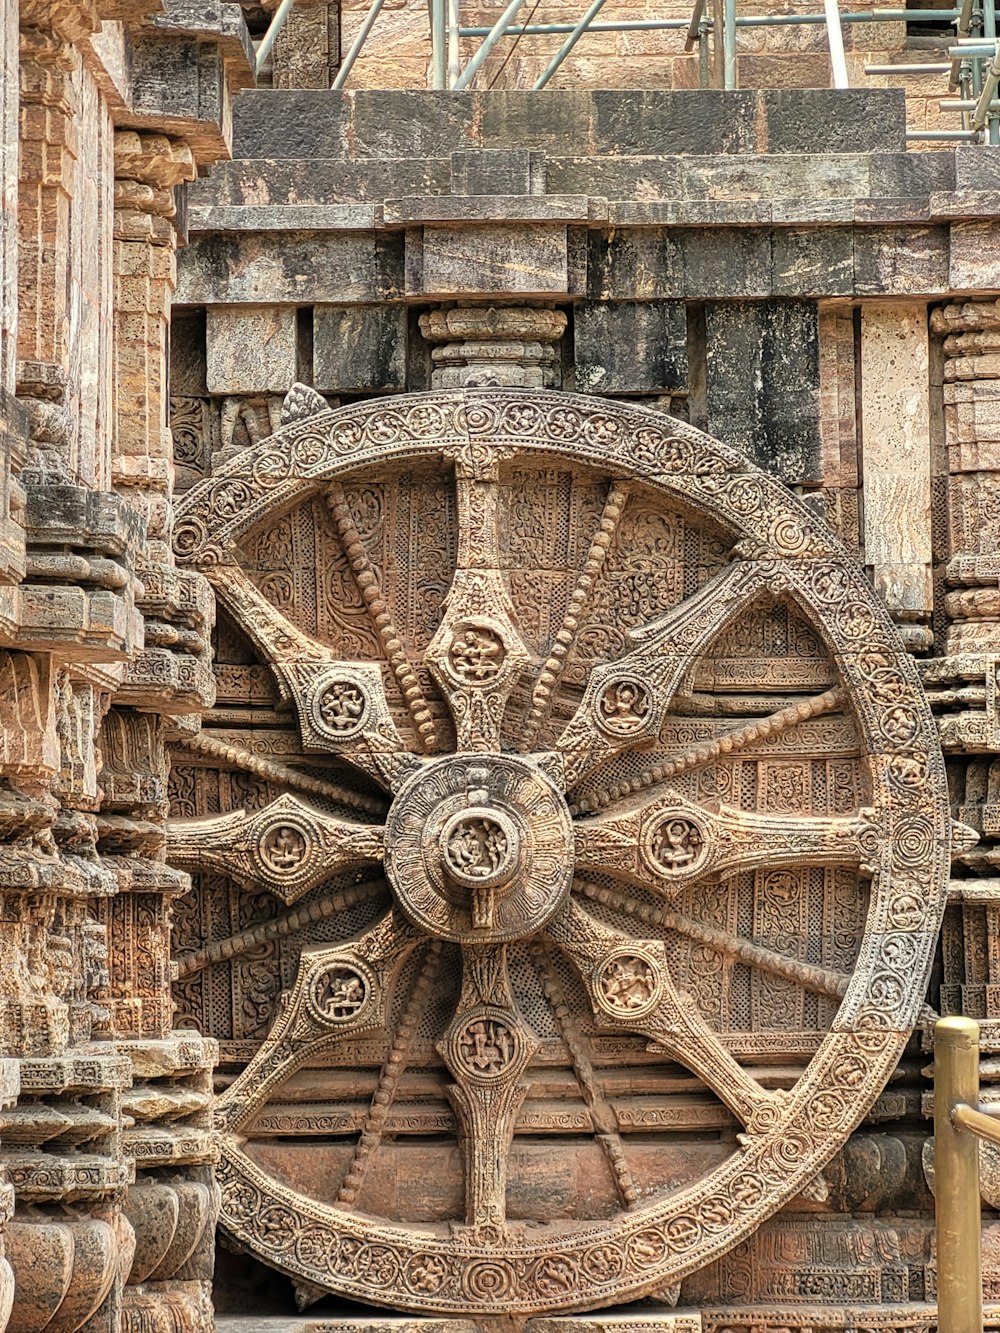 a large wheel on the side of a building